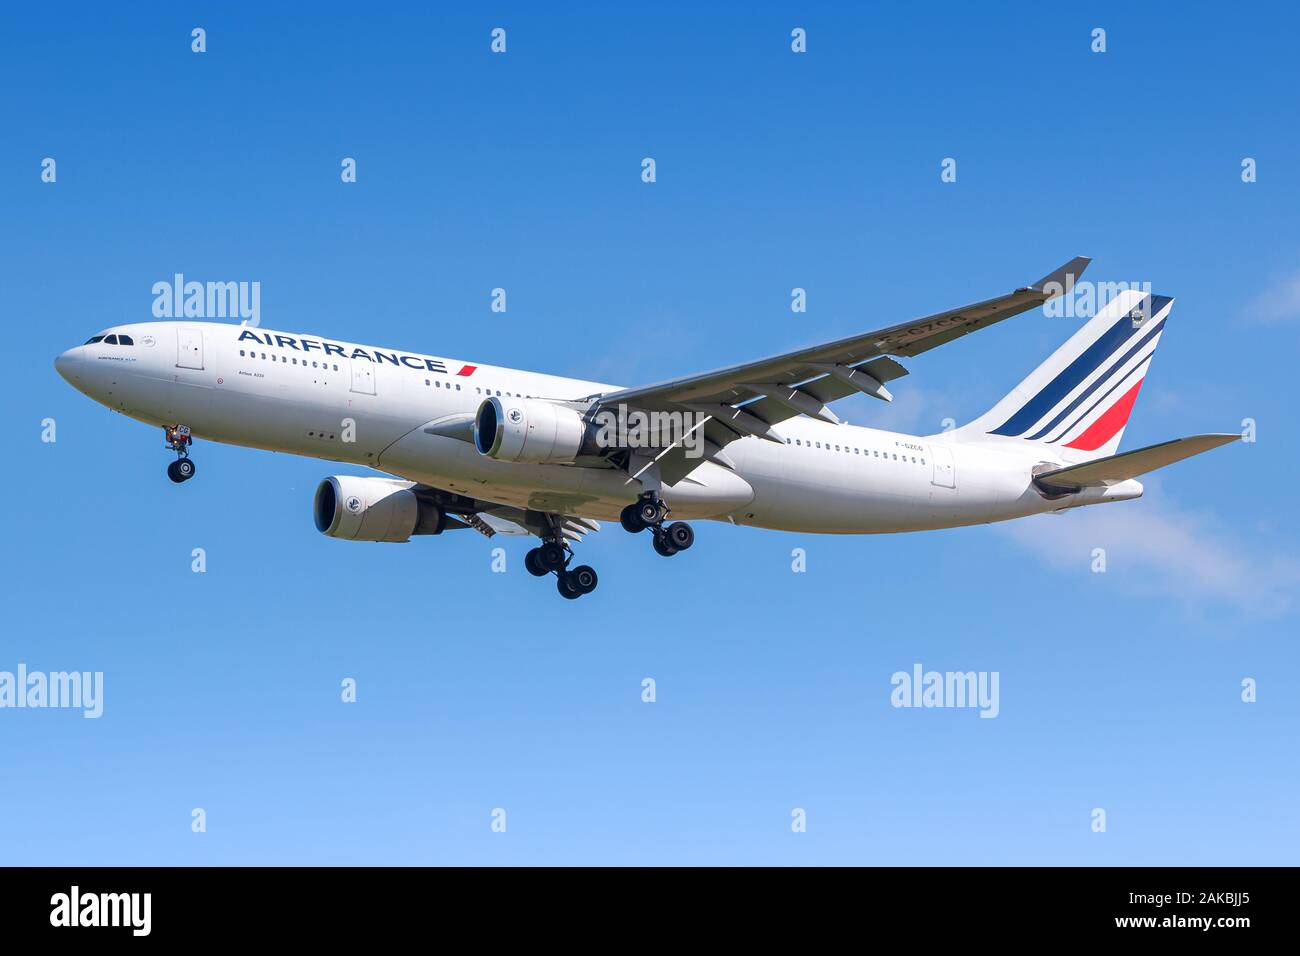 Paris, France - August 17, 2018: Air France Airbus A330 airplane at Paris Charles de Gaulle airport (CDG) in France. Airbus is an aircraft manufacture Stock Photo